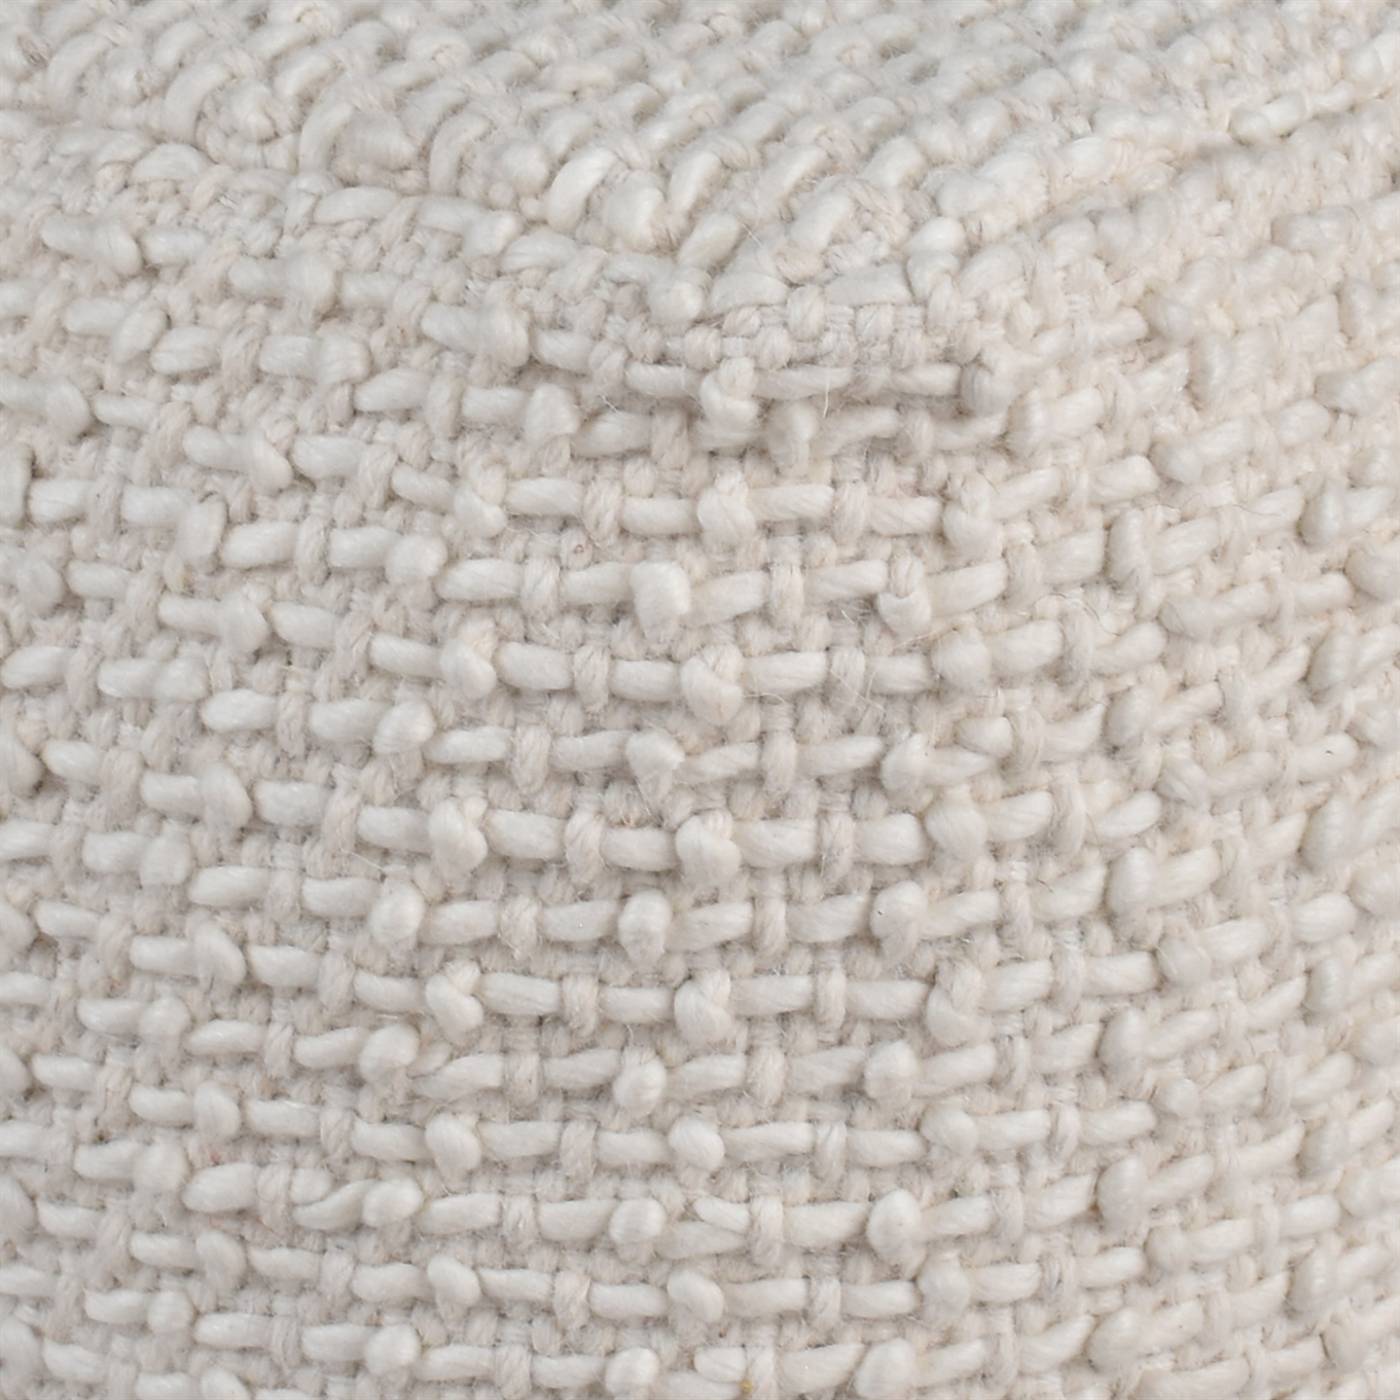 Govalle Pouf, 40x40x40 cm, Natural White, Wool, Hand Woven, Pitloom, Flat Weave